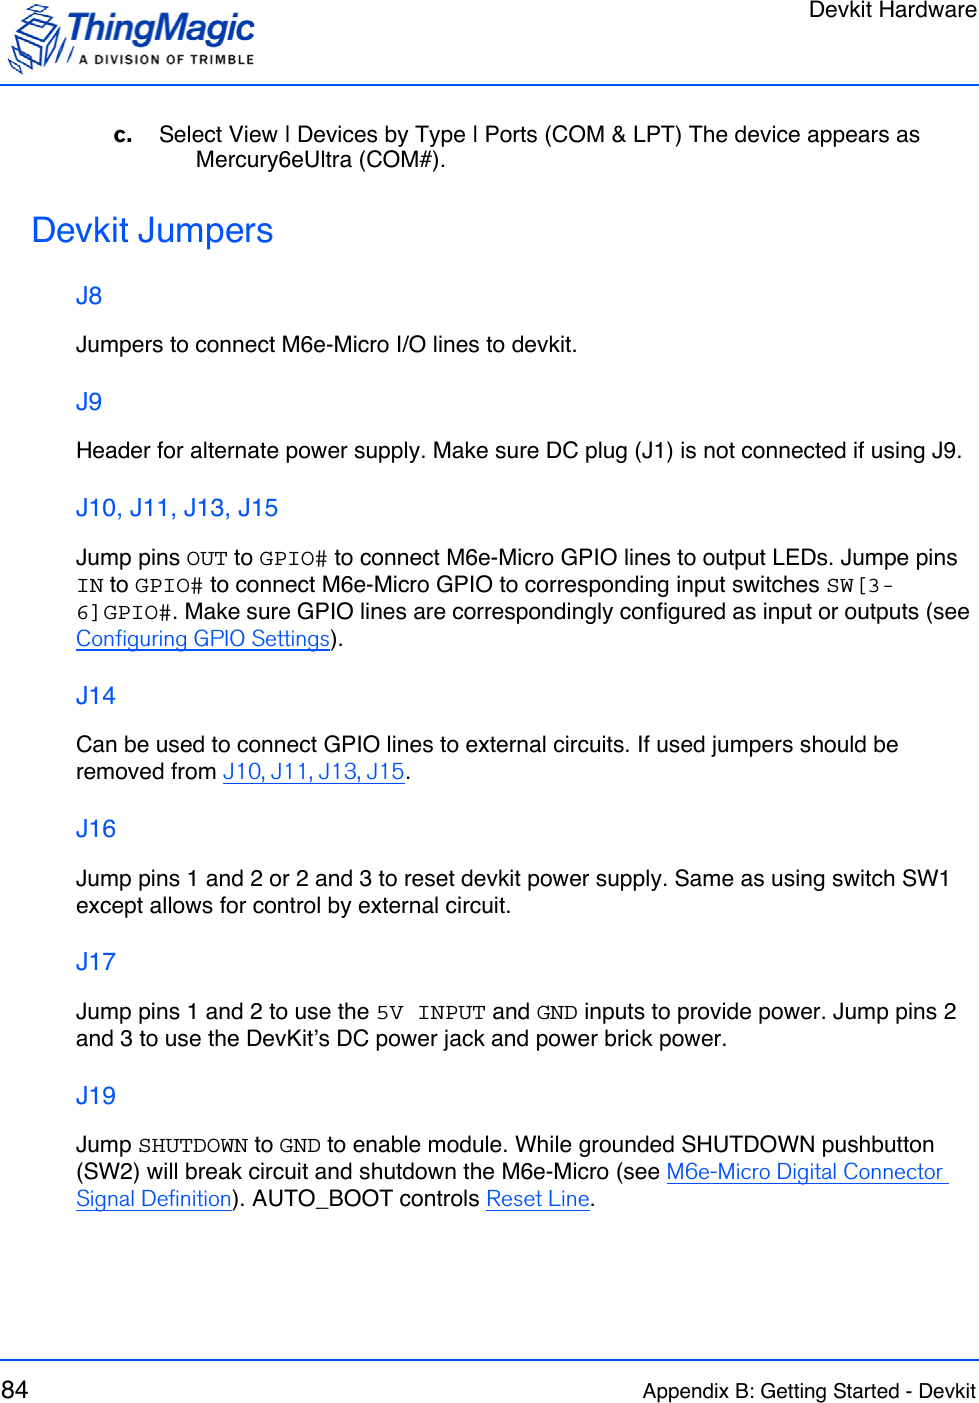 Devkit Hardware84 Appendix B: Getting Started - Devkitc.    Select View | Devices by Type | Ports (COM &amp; LPT) The device appears as Mercury6eUltra (COM#).Devkit JumpersJ8Jumpers to connect M6e-Micro I/O lines to devkit. J9Header for alternate power supply. Make sure DC plug (J1) is not connected if using J9.J10, J11, J13, J15Jump pins OUT to GPIO# to connect M6e-Micro GPIO lines to output LEDs. Jumpe pins IN to GPIO# to connect M6e-Micro GPIO to corresponding input switches SW[3-6]GPIO#. Make sure GPIO lines are correspondingly configured as input or outputs (see Configuring GPIO Settings).J14Can be used to connect GPIO lines to external circuits. If used jumpers should be removed from J10, J11, J13, J15.J16Jump pins 1 and 2 or 2 and 3 to reset devkit power supply. Same as using switch SW1 except allows for control by external circuit.J17Jump pins 1 and 2 to use the 5V INPUT and GND inputs to provide power. Jump pins 2 and 3 to use the DevKitʼs DC power jack and power brick power.J19Jump SHUTDOWN to GND to enable module. While grounded SHUTDOWN pushbutton (SW2) will break circuit and shutdown the M6e-Micro (see M6e-Micro Digital Connector Signal Definition). AUTO_BOOT controls Reset Line.